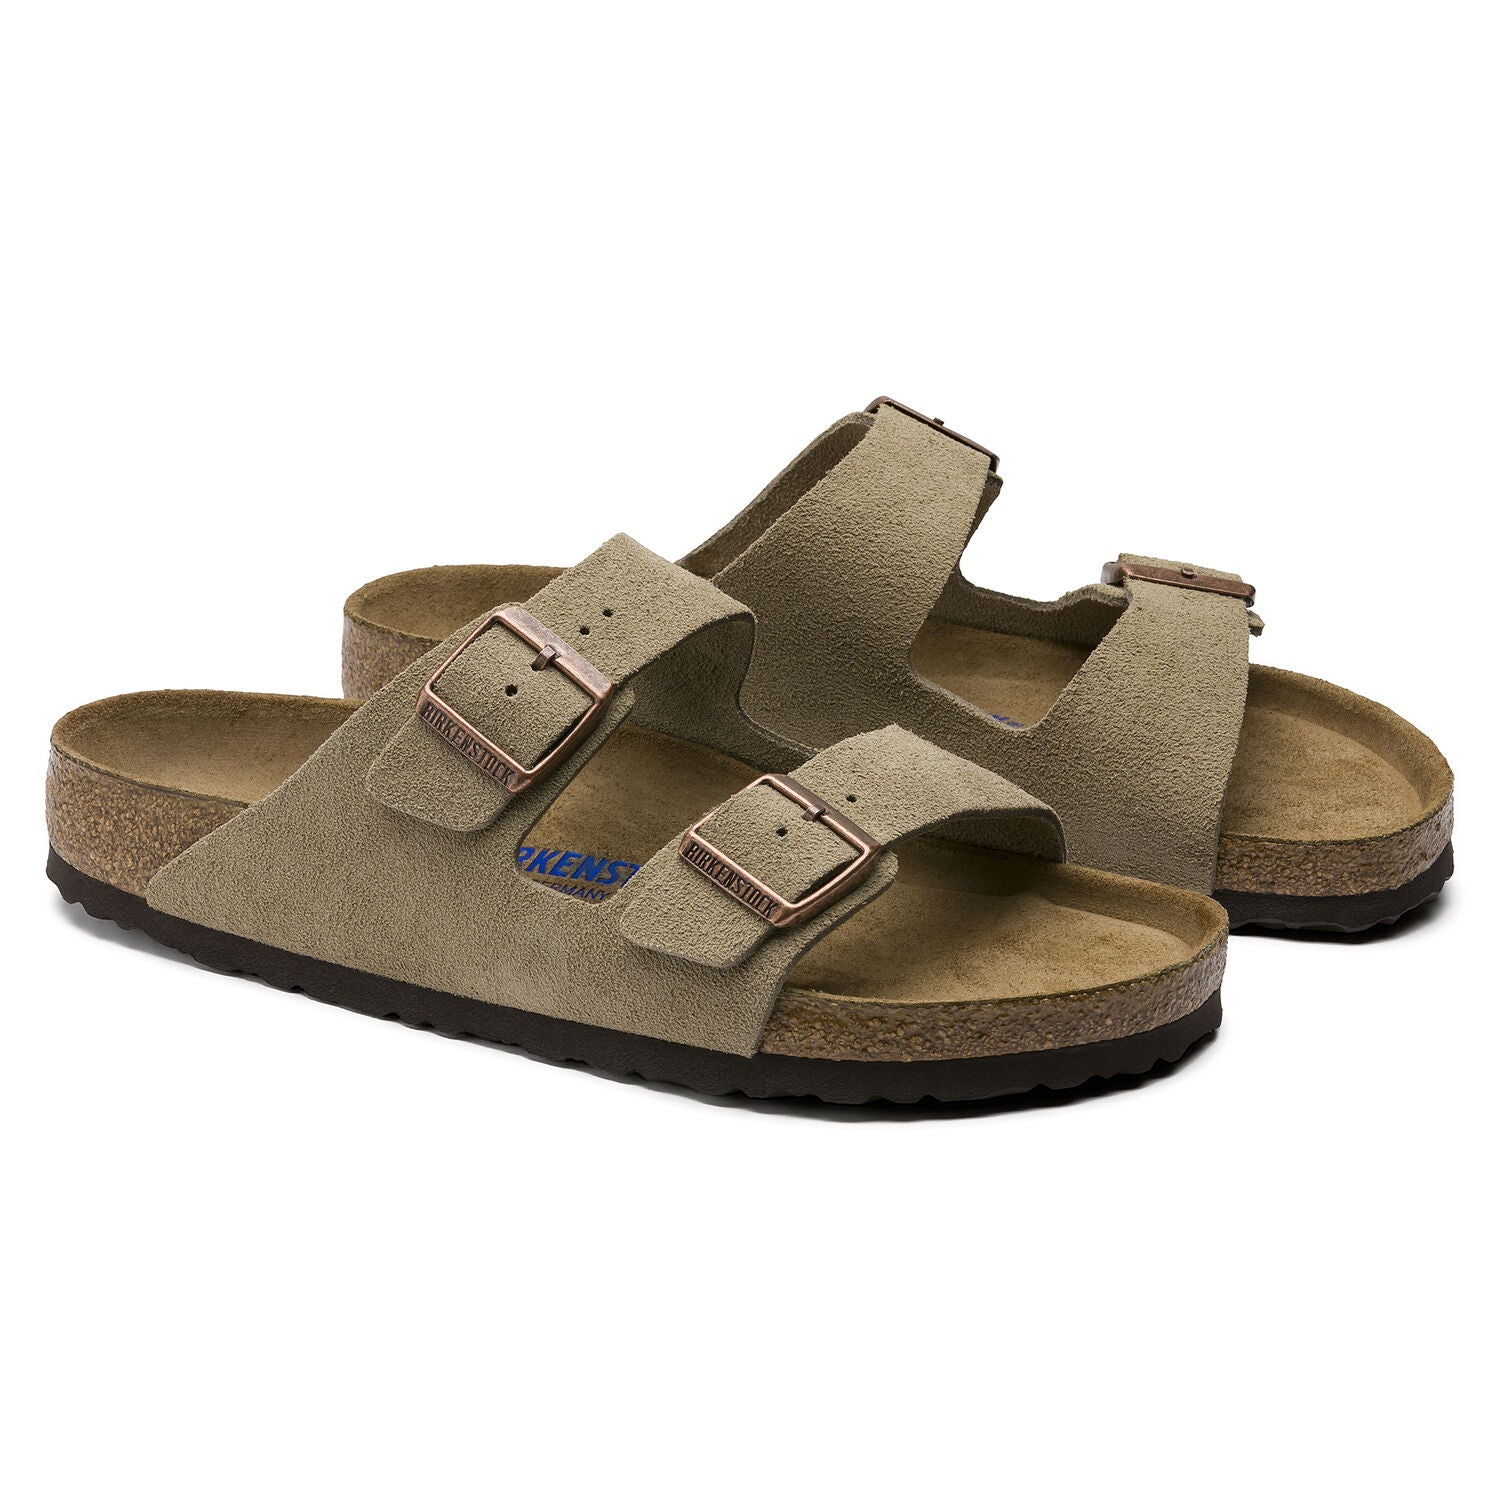 Arizona Suede Leather in Taupe (Soft Footbed - Suede Lined) - Milu James St